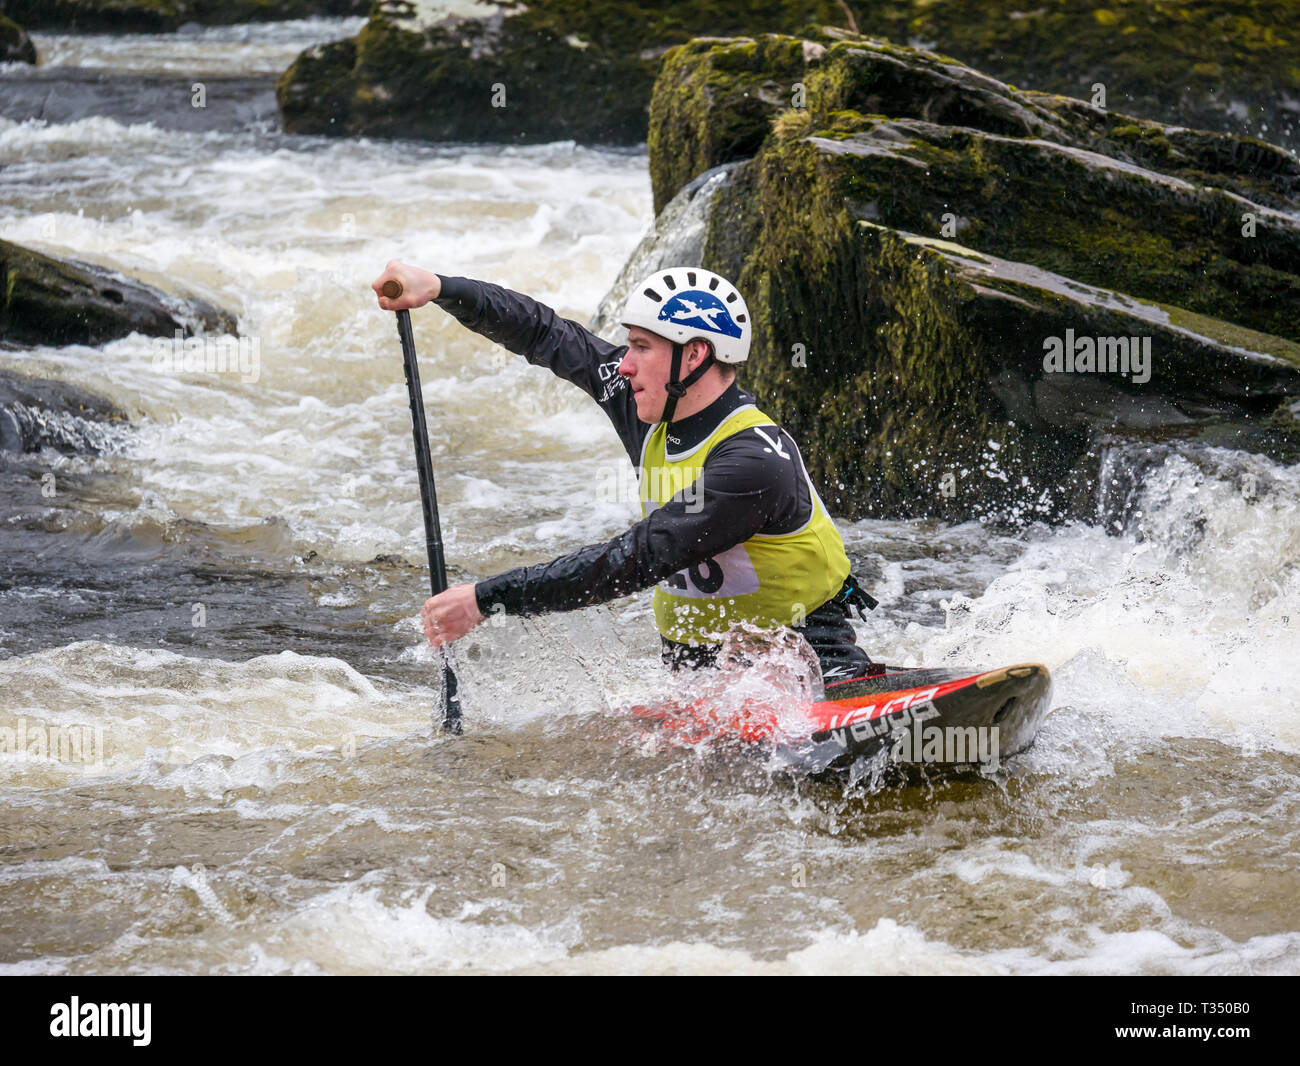 Page 3 - Canoe Club High Resolution Stock Photography and Images - Alamy